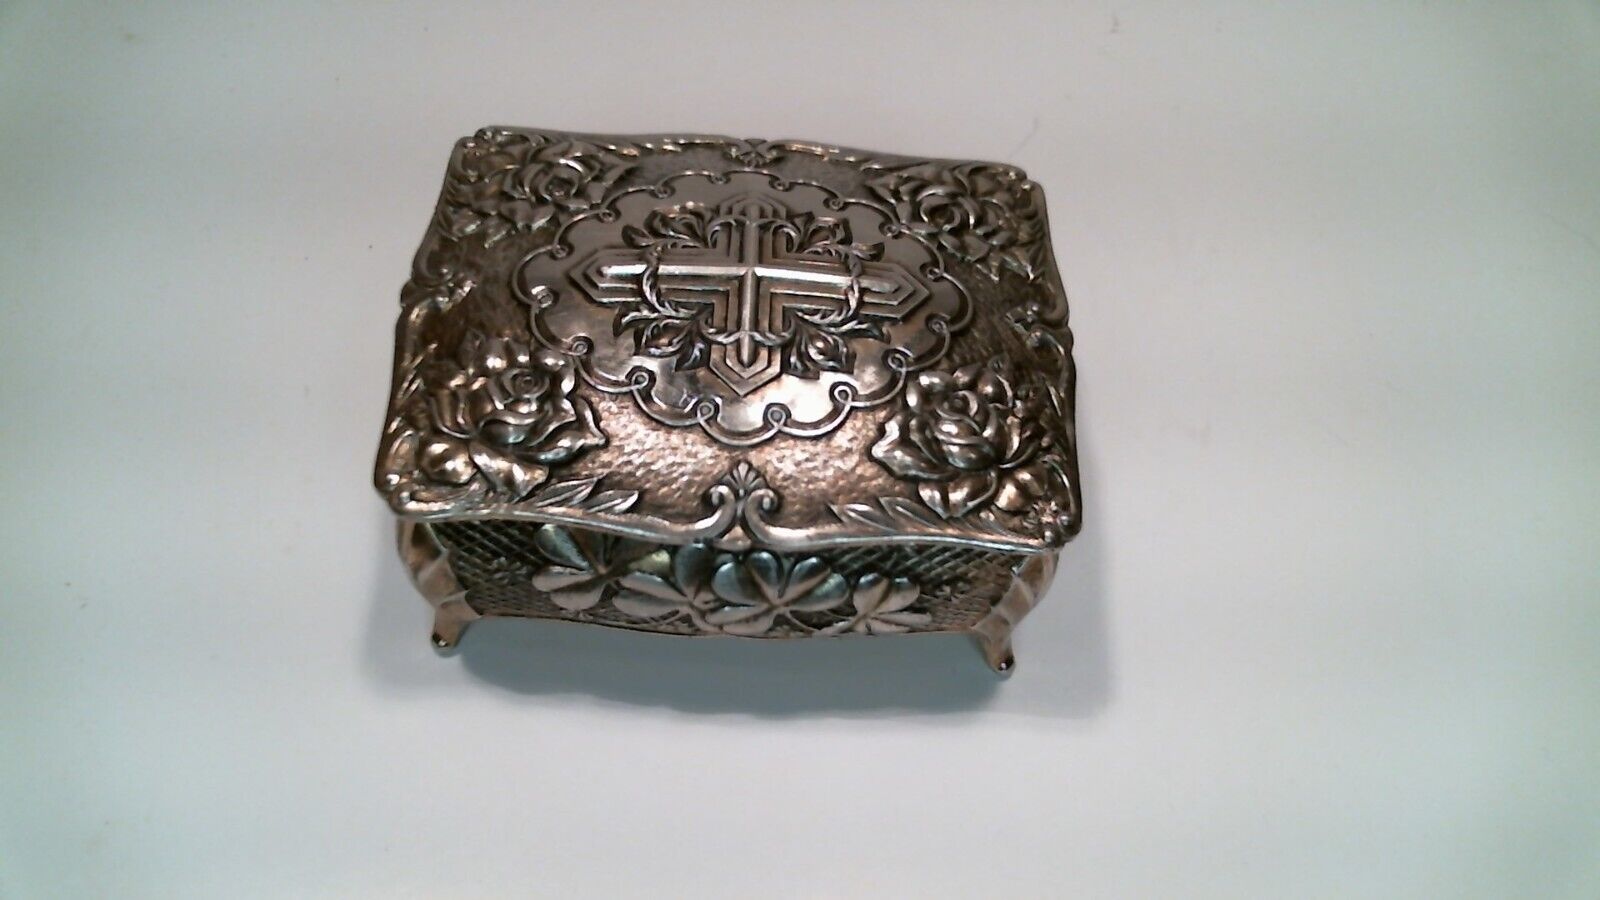  Vintage Silver Clad Small Footed Jewelry Trinket Box, Raised Pattern